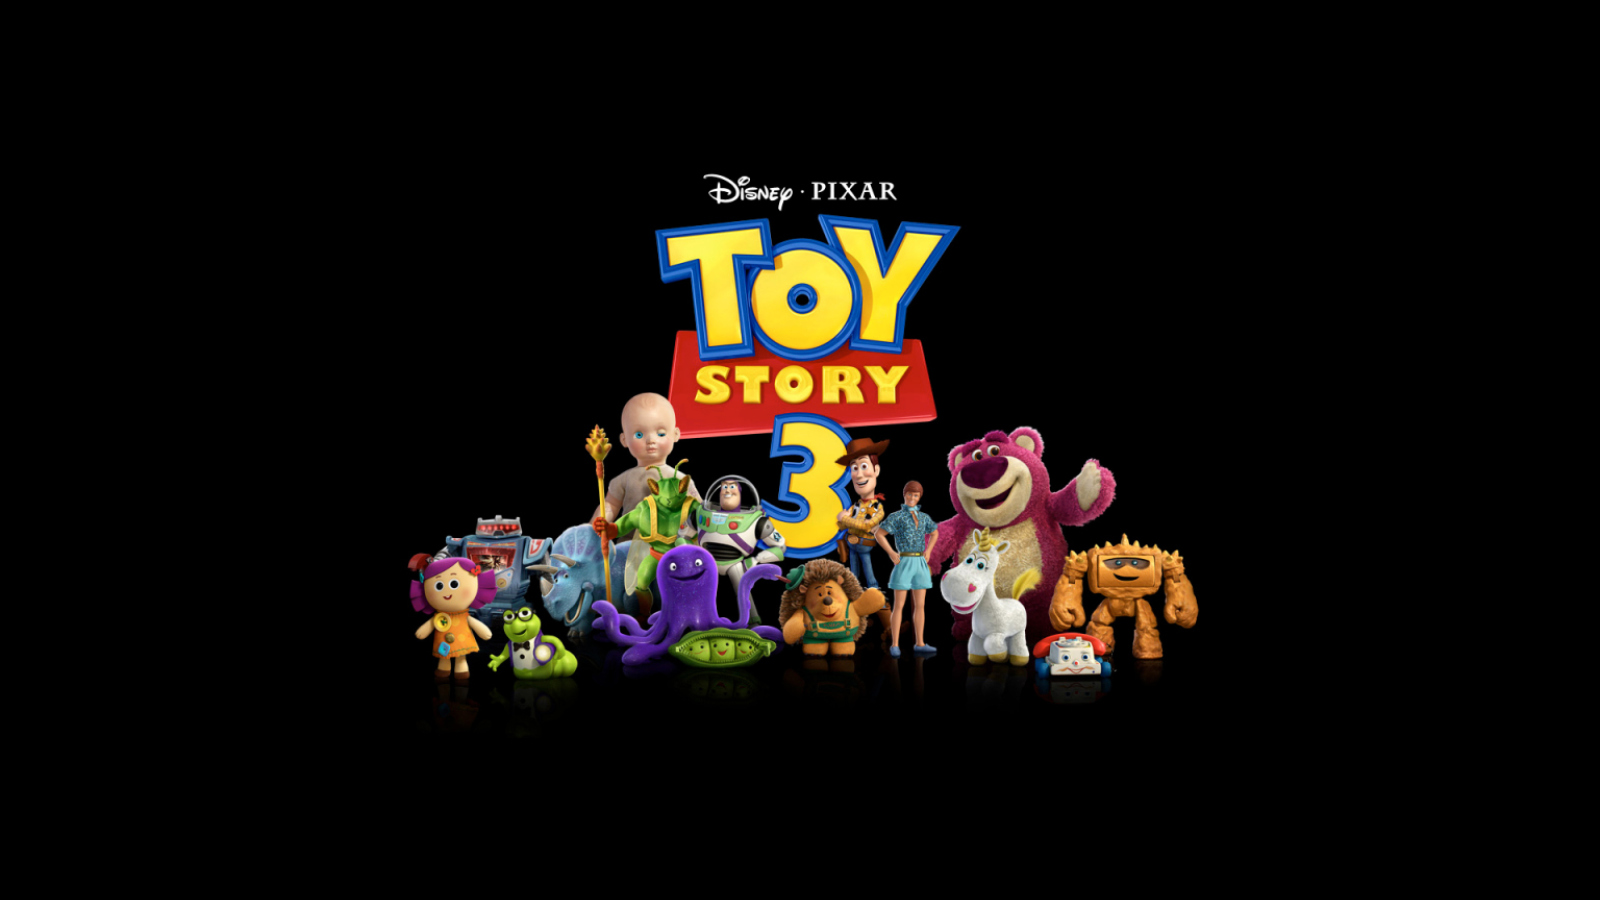 Toy Story 3 wallpaper 1600x900